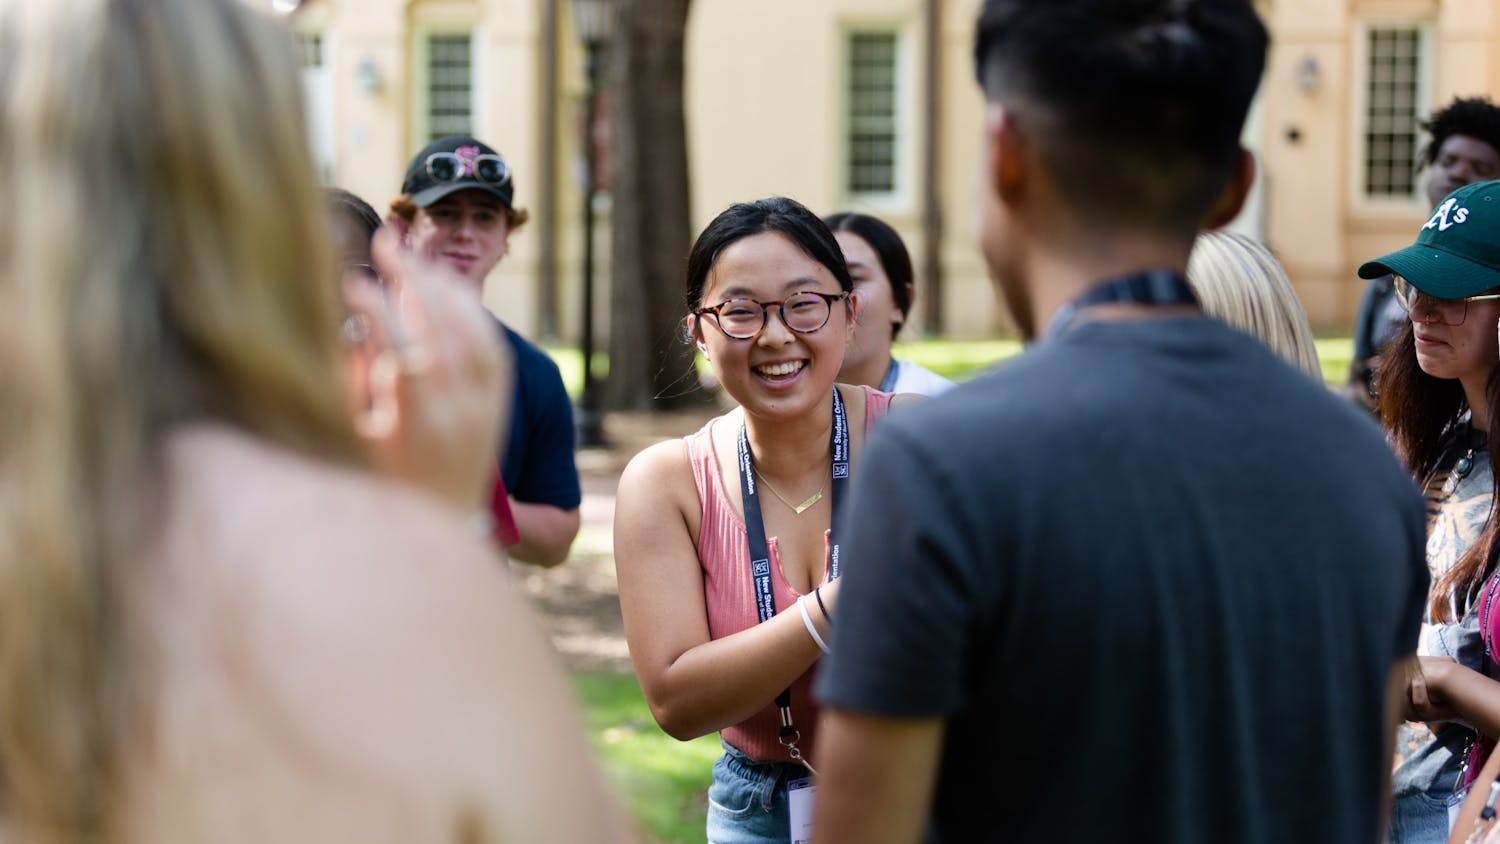 A first-year student laughs while playing a game of rock paper scissors on the horseshoe during an orientation session on July 20, 2022. Before starting their first semester at USC, freshmen students attend a two-day program to introduce them to campus and college life.&nbsp;